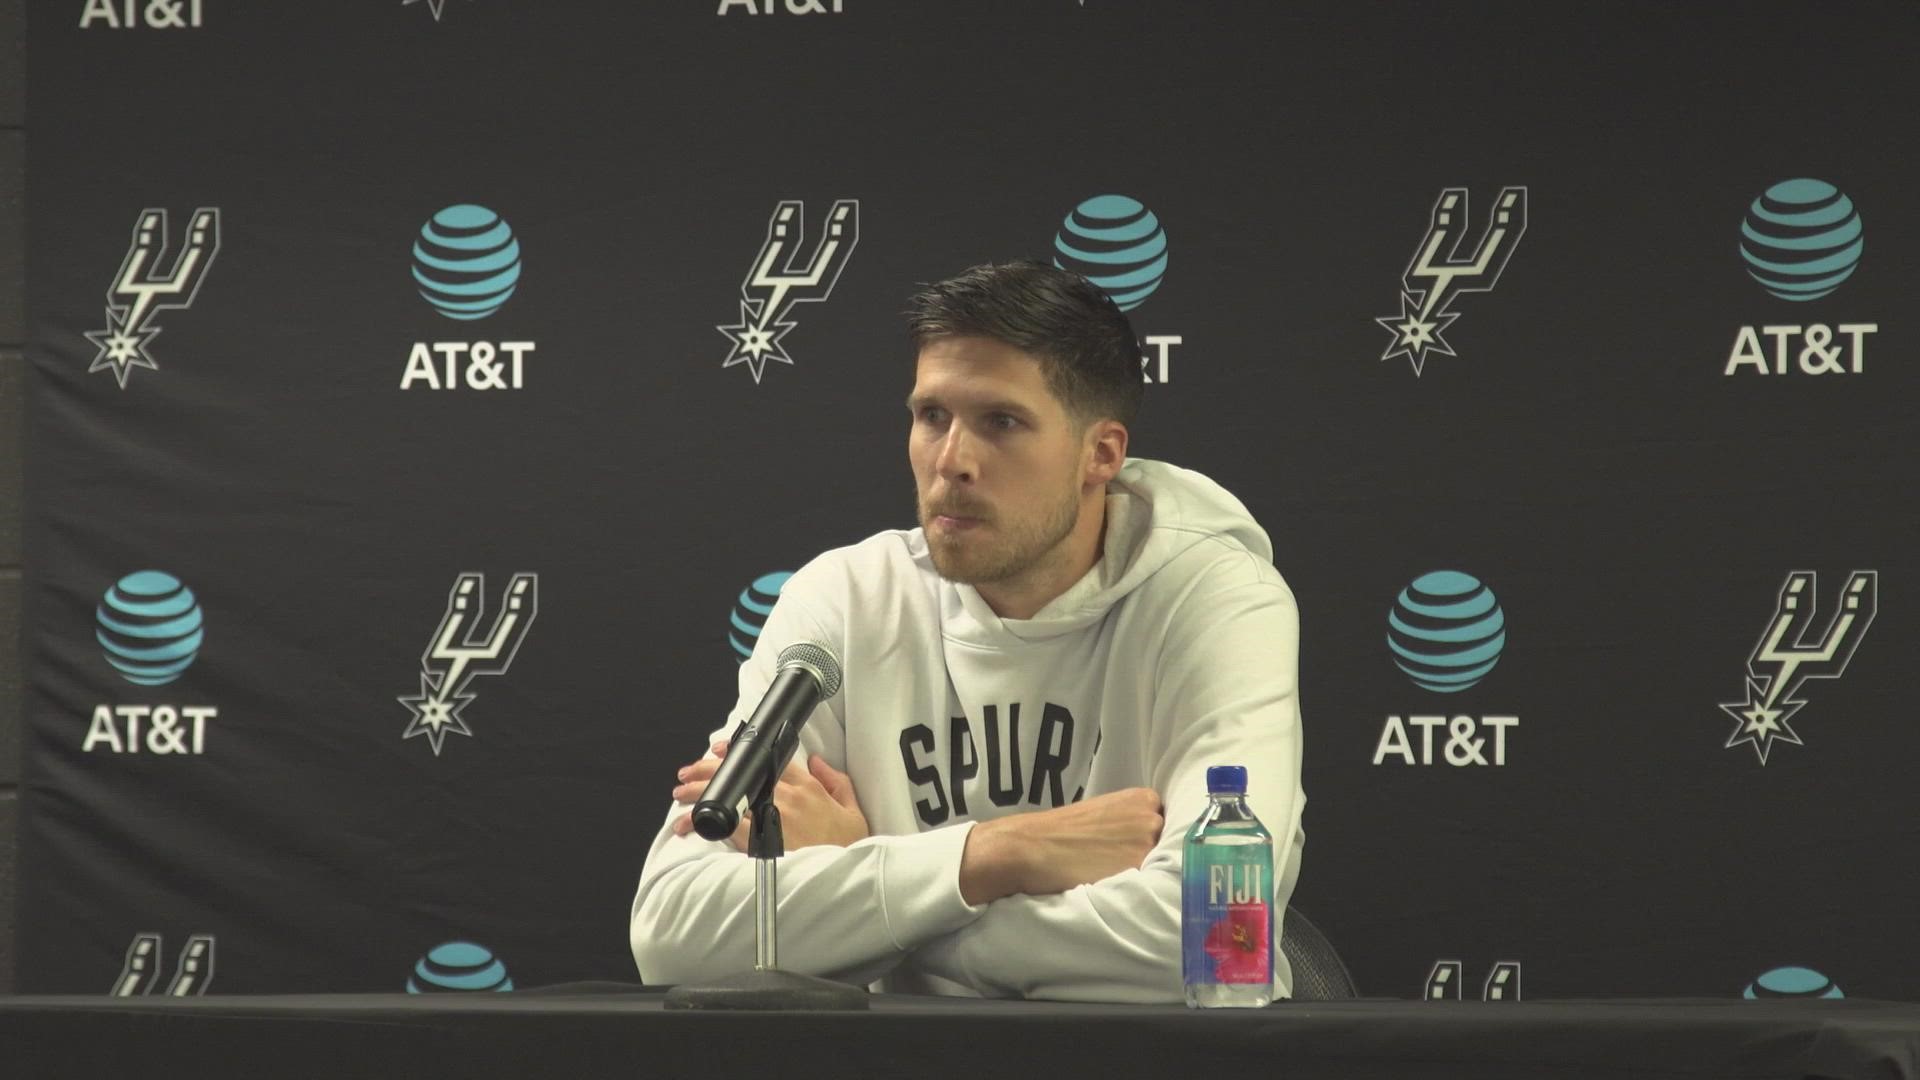 McDermott talked about the randomness of the Spurs' offense, and broke down his style of play.